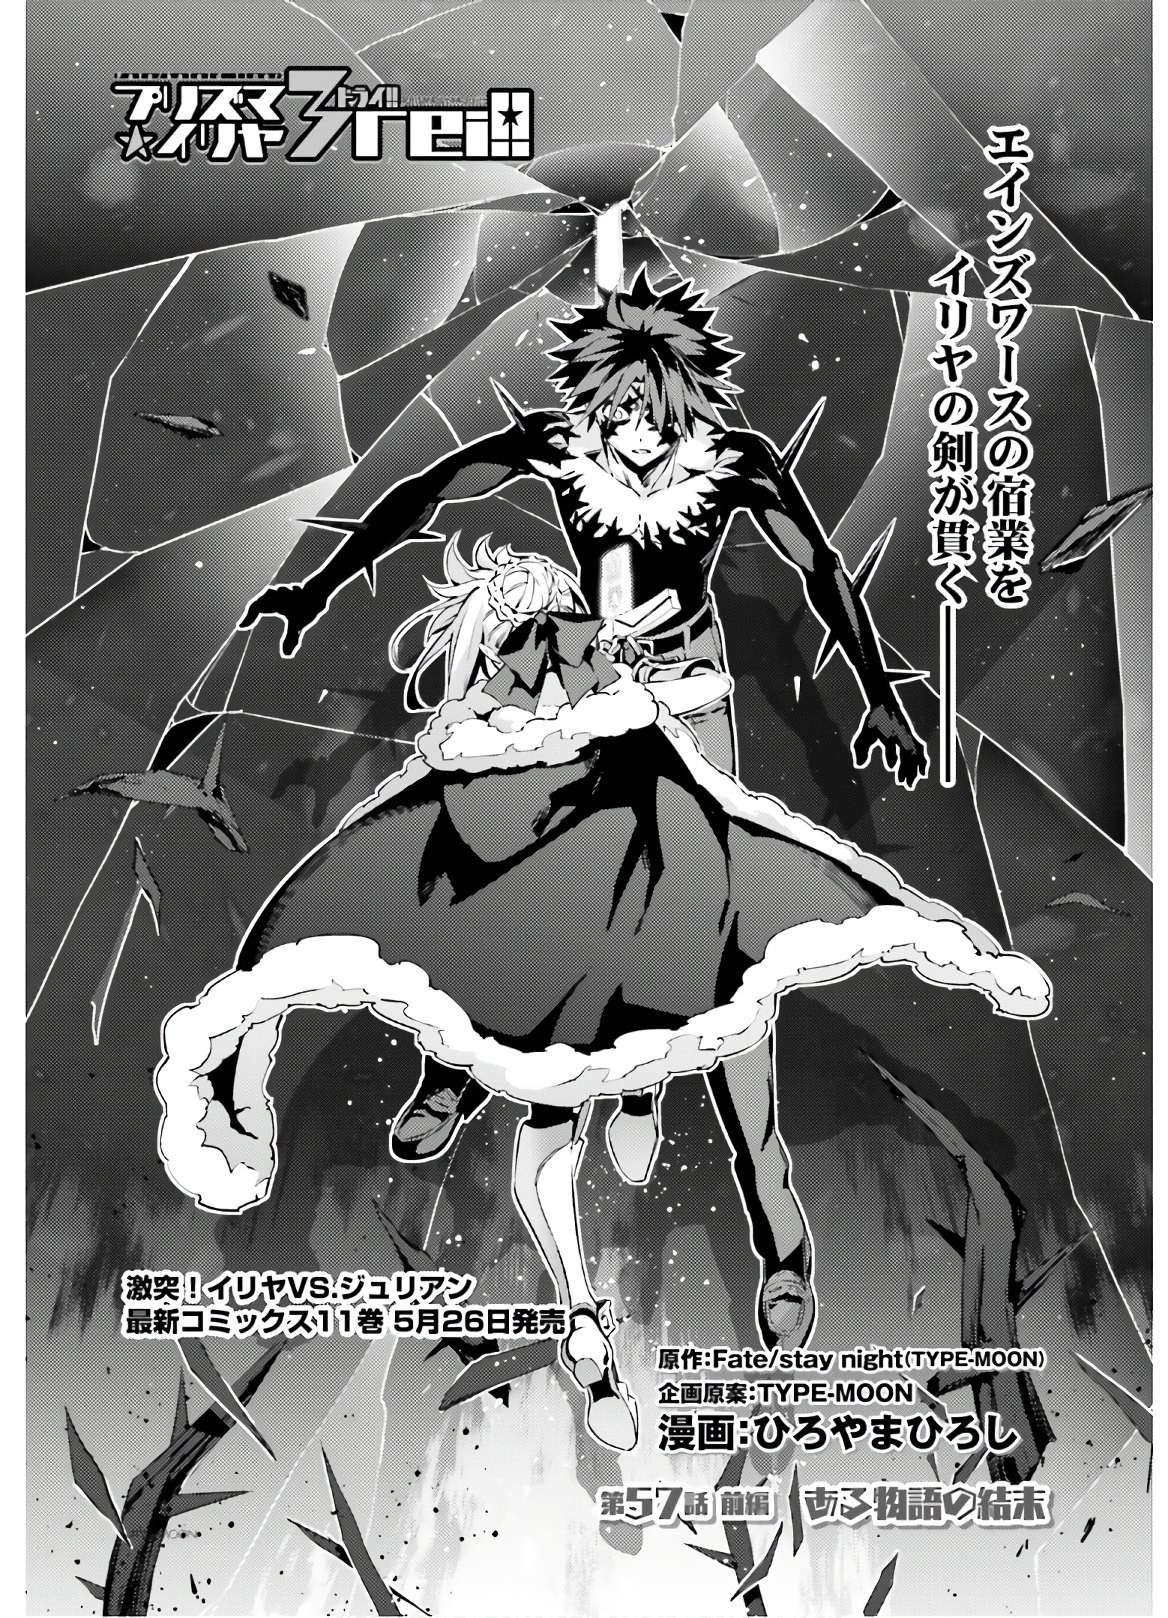 Fate/Kaleid Liner Prisma Illya Drei! - Chapter 57-1 - Page 2